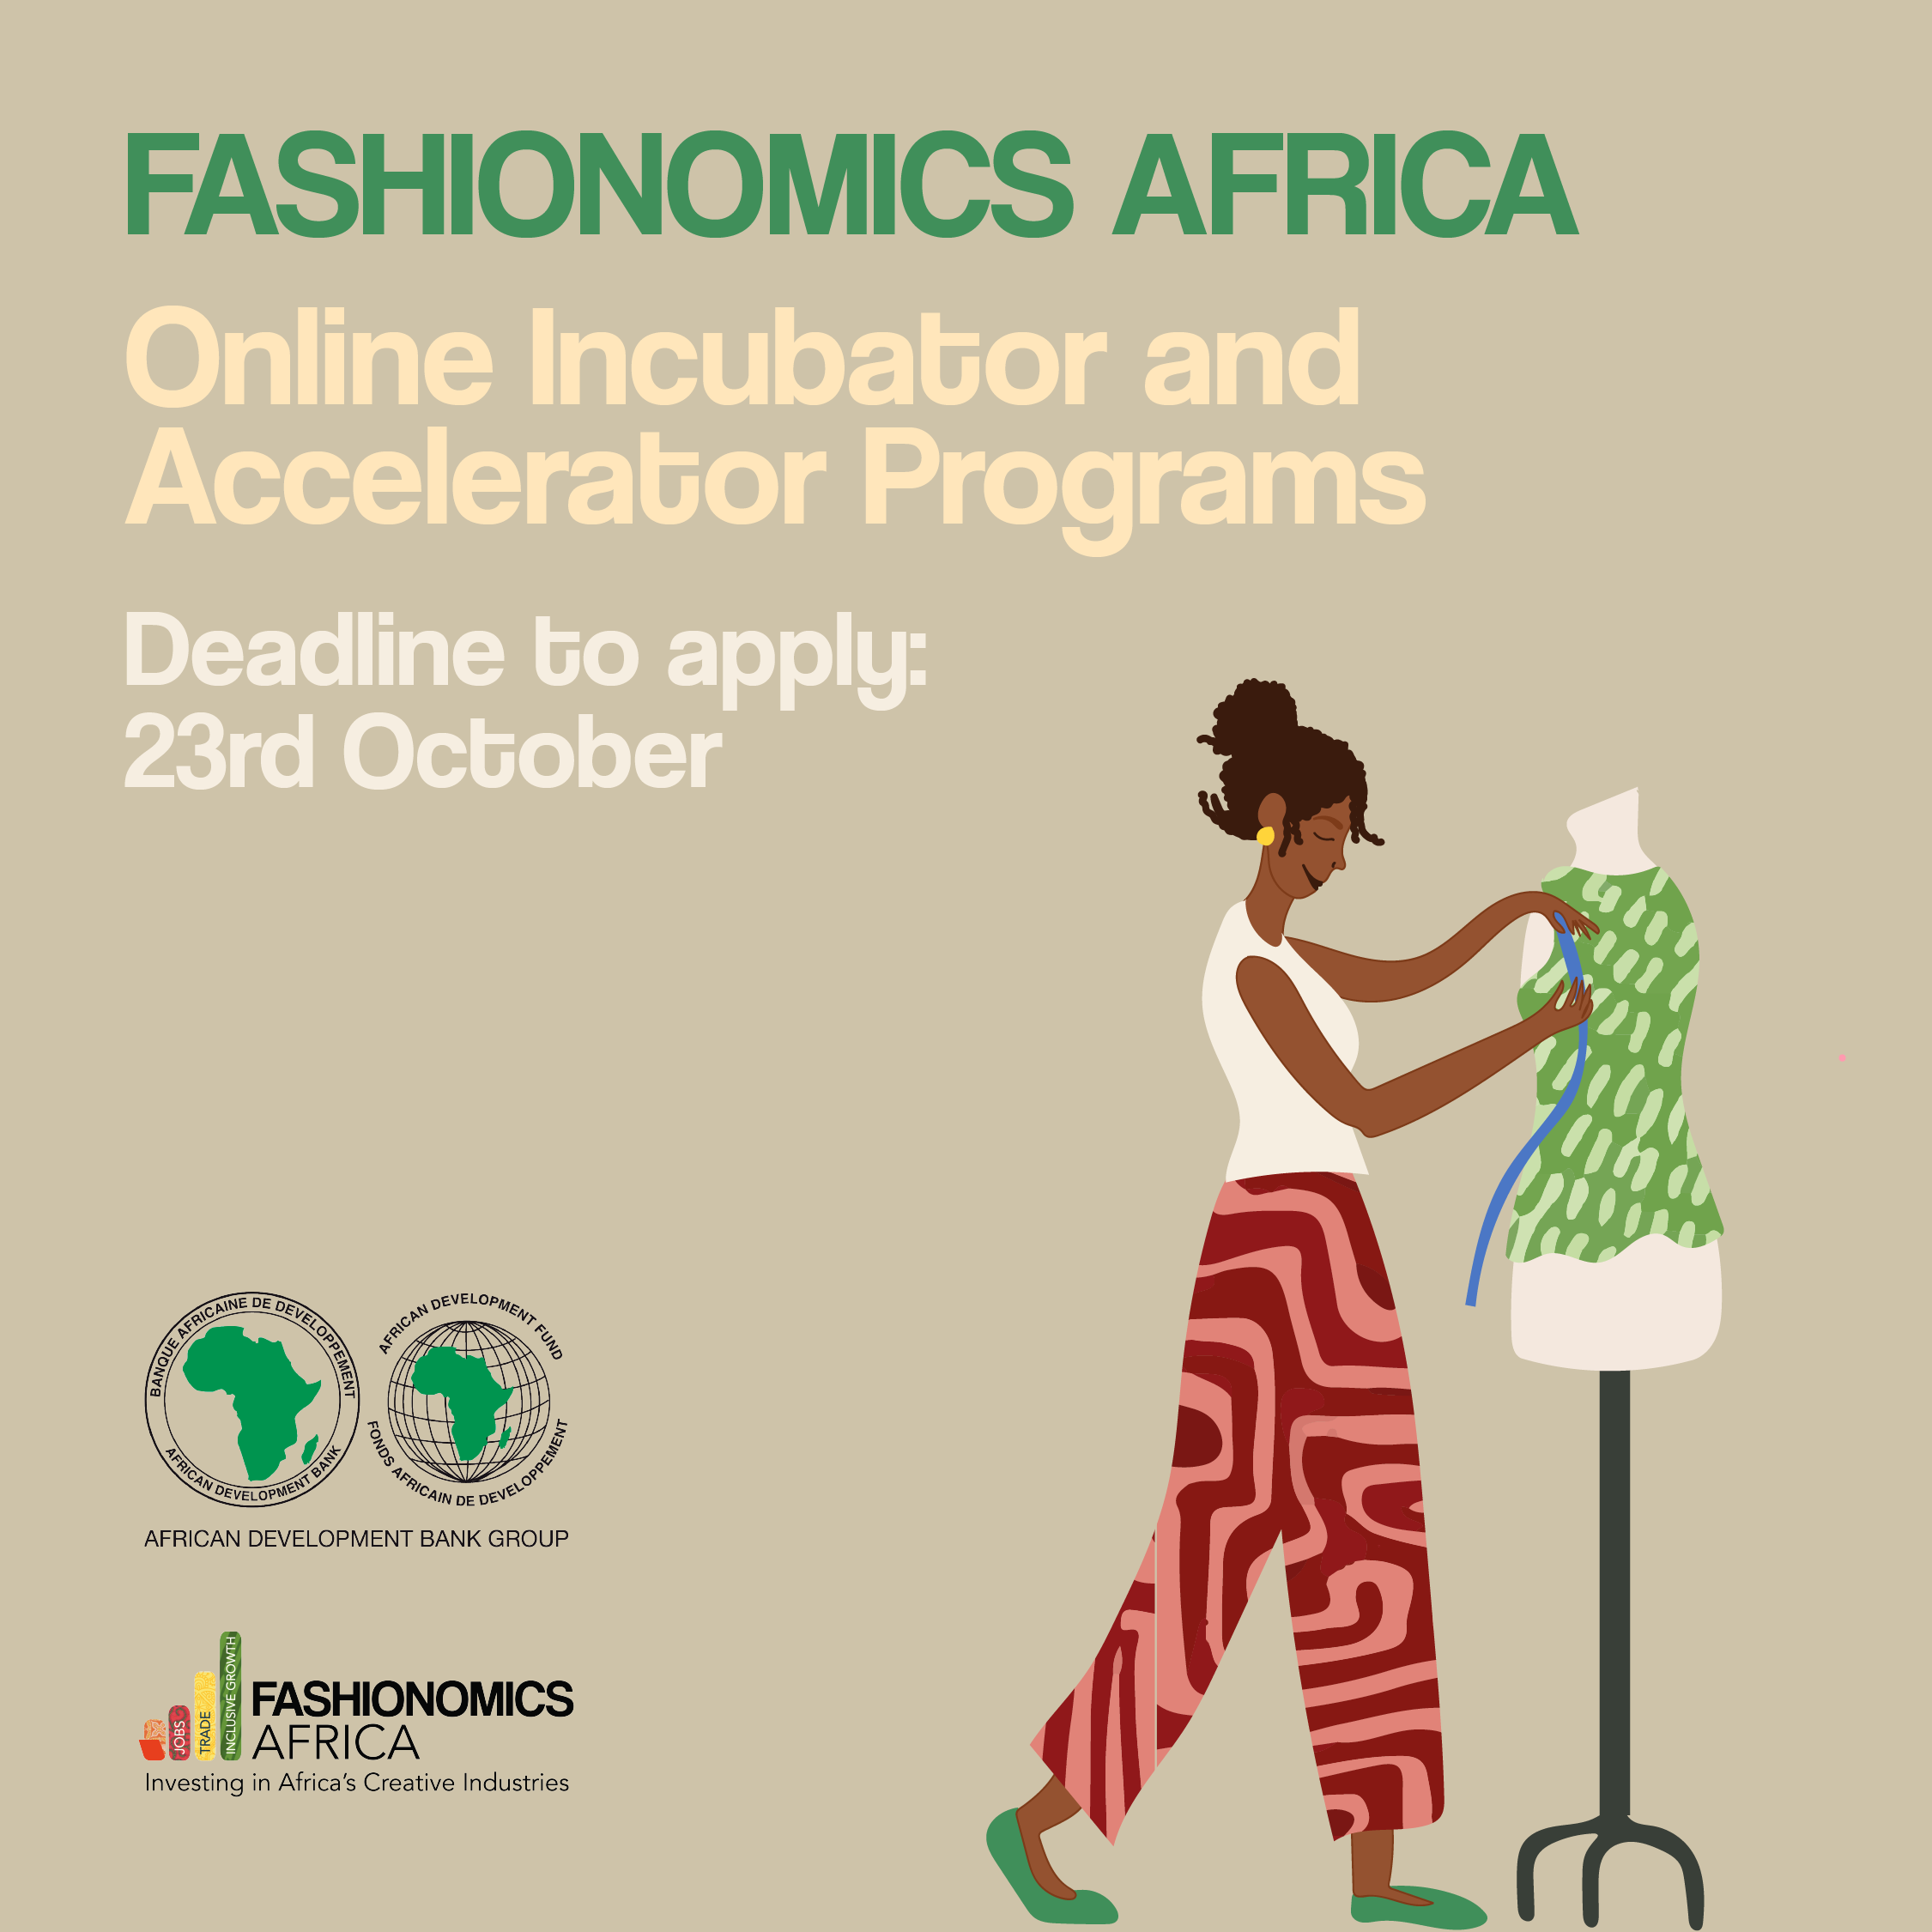 African Fashion, Textile, Apparel and Accessories entrepreneurs and businesses from Fashionomics Africa Online Incubator and Accelerator programs